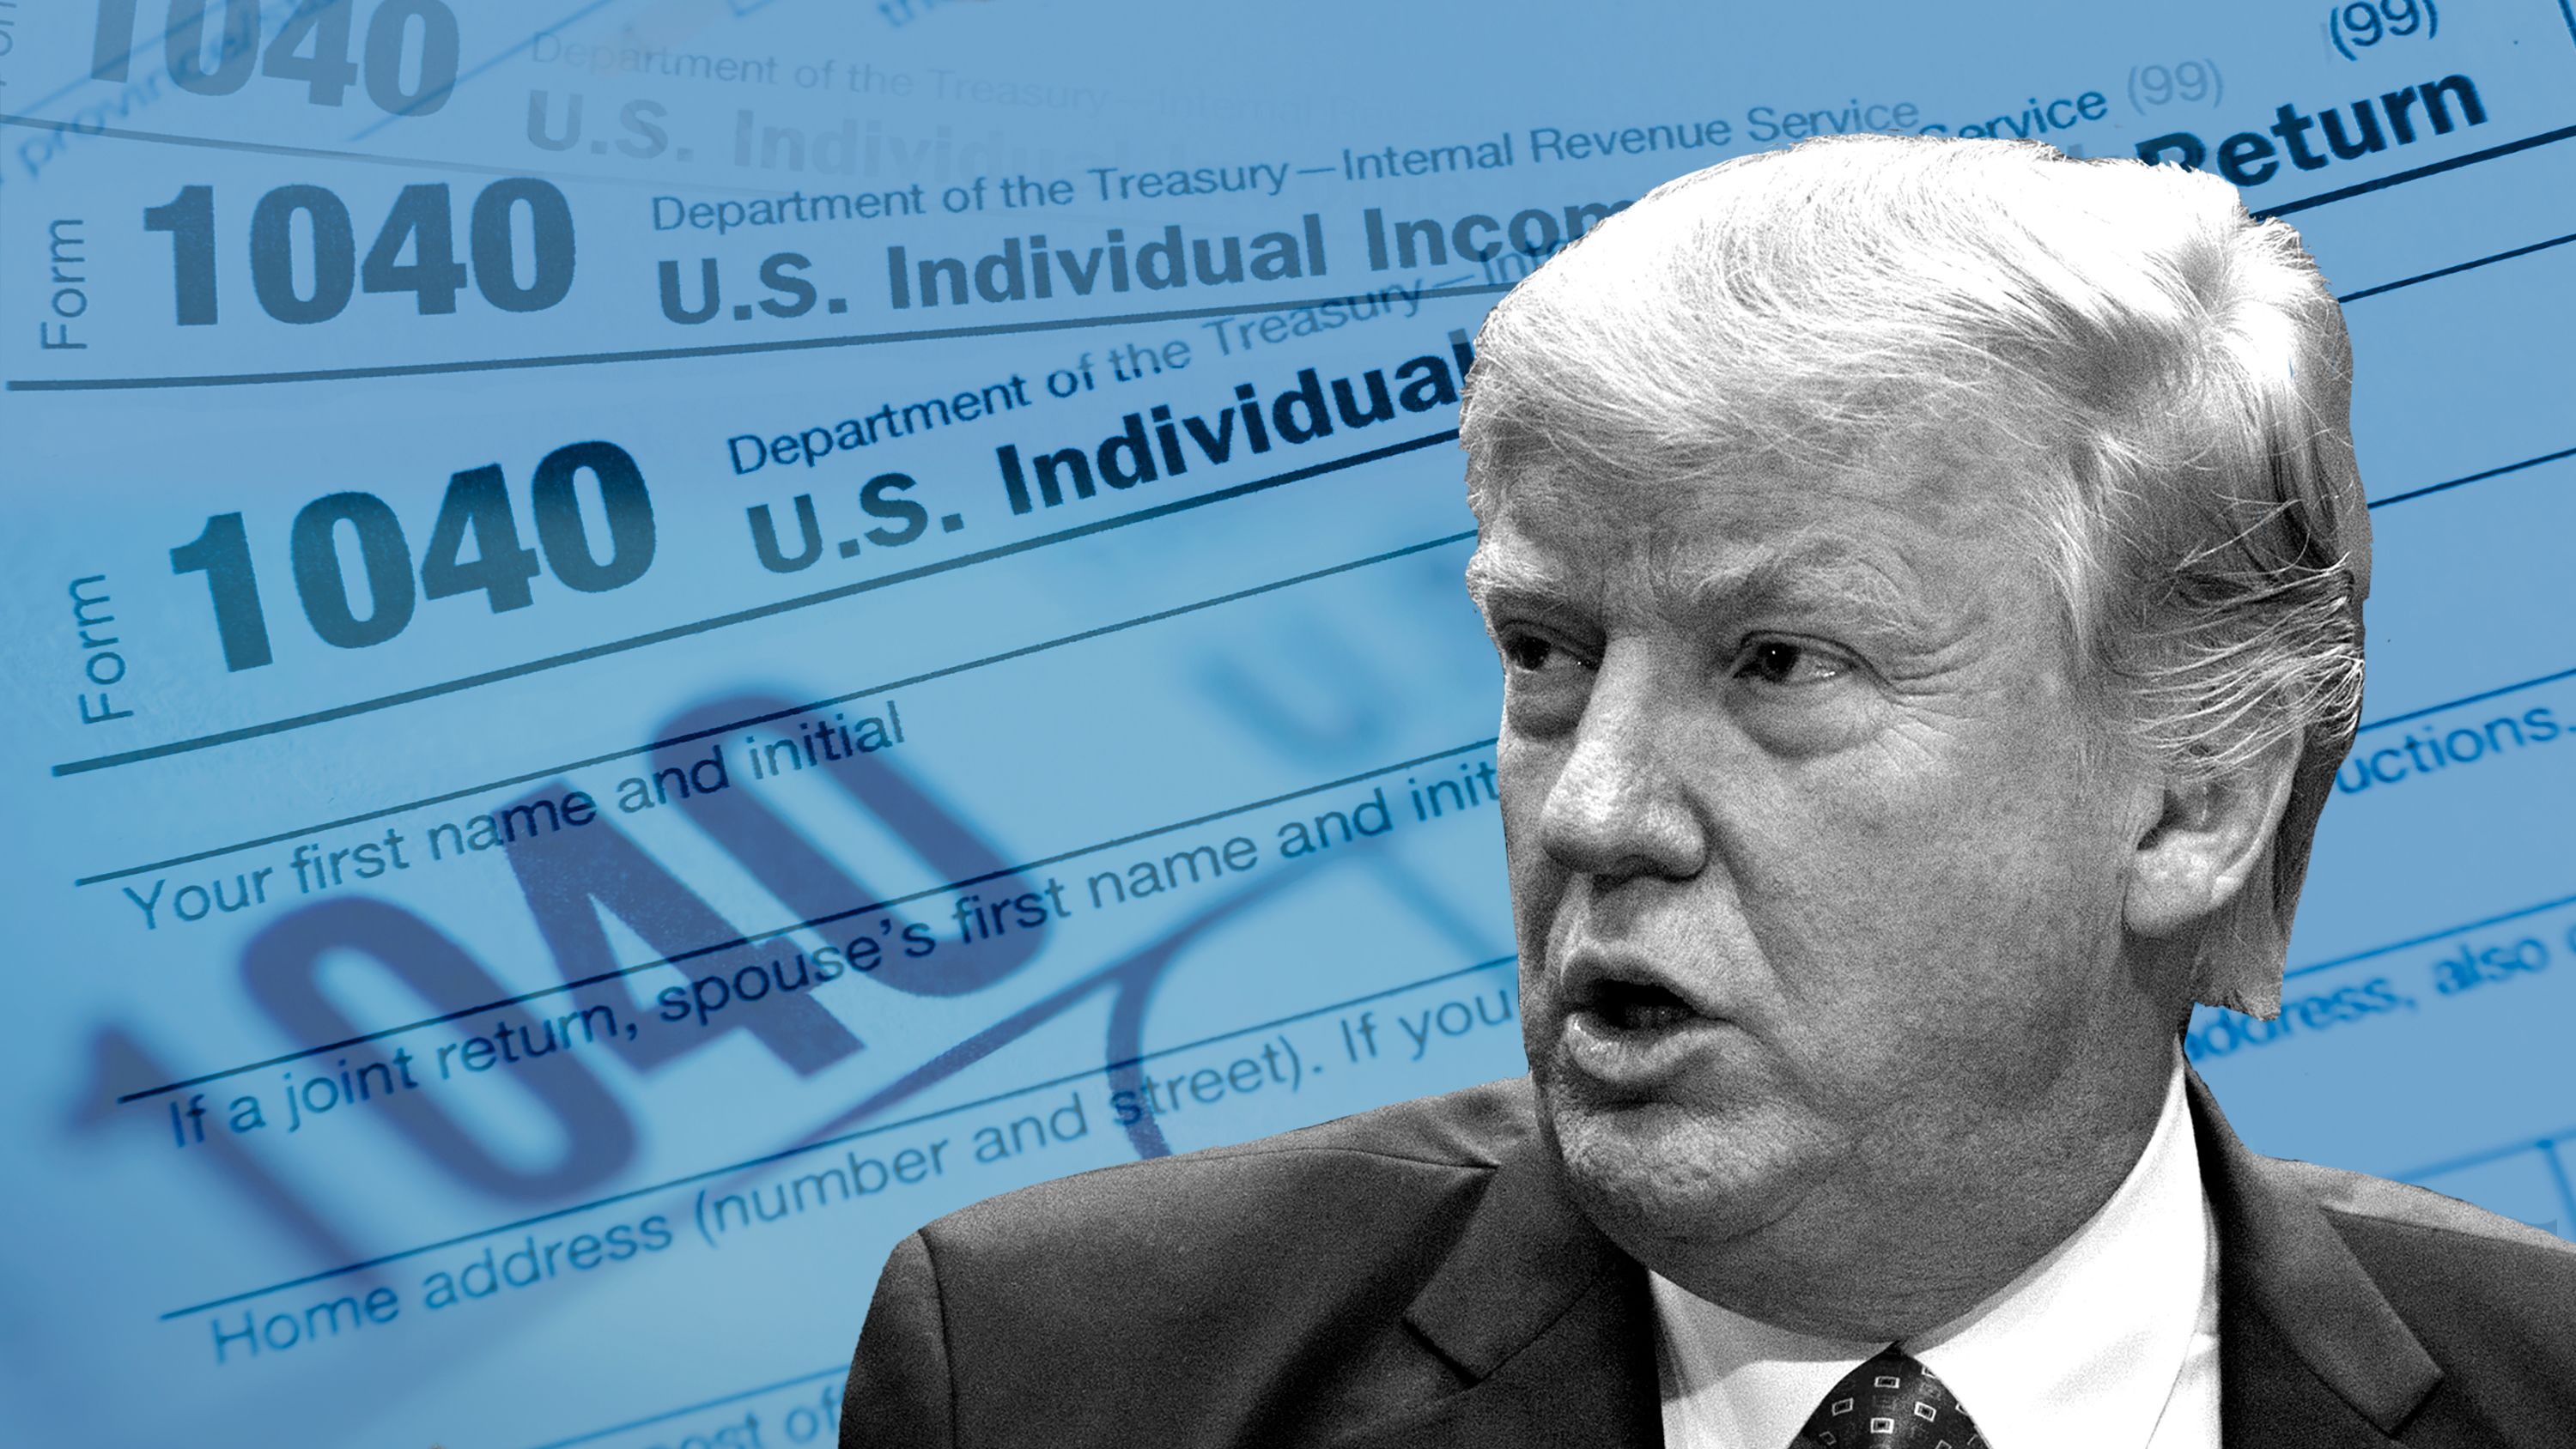 Donald Trump May Owe IRS More Than $100 Million in Back Taxes